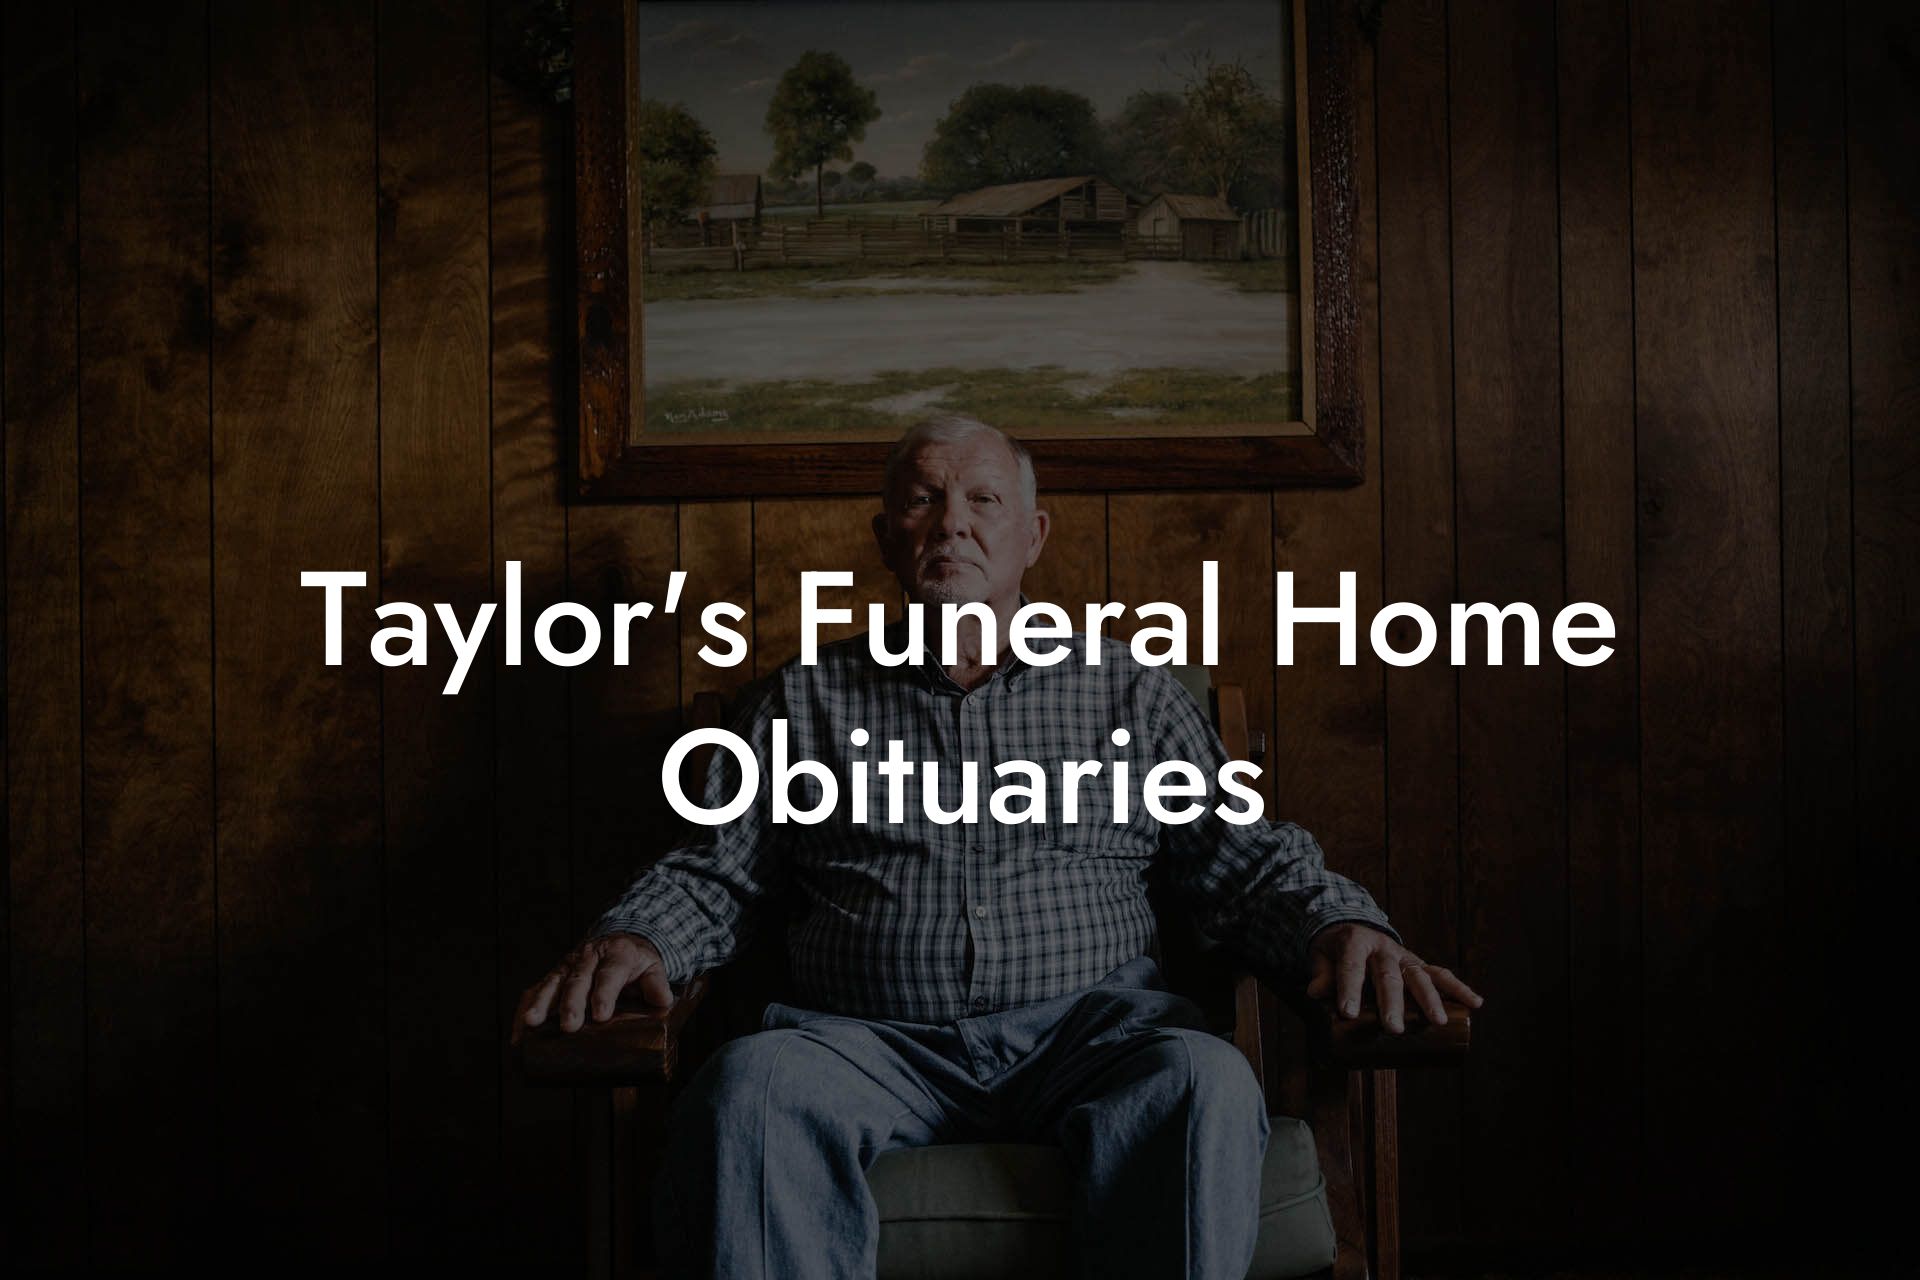 Taylor's Funeral Home Obituaries